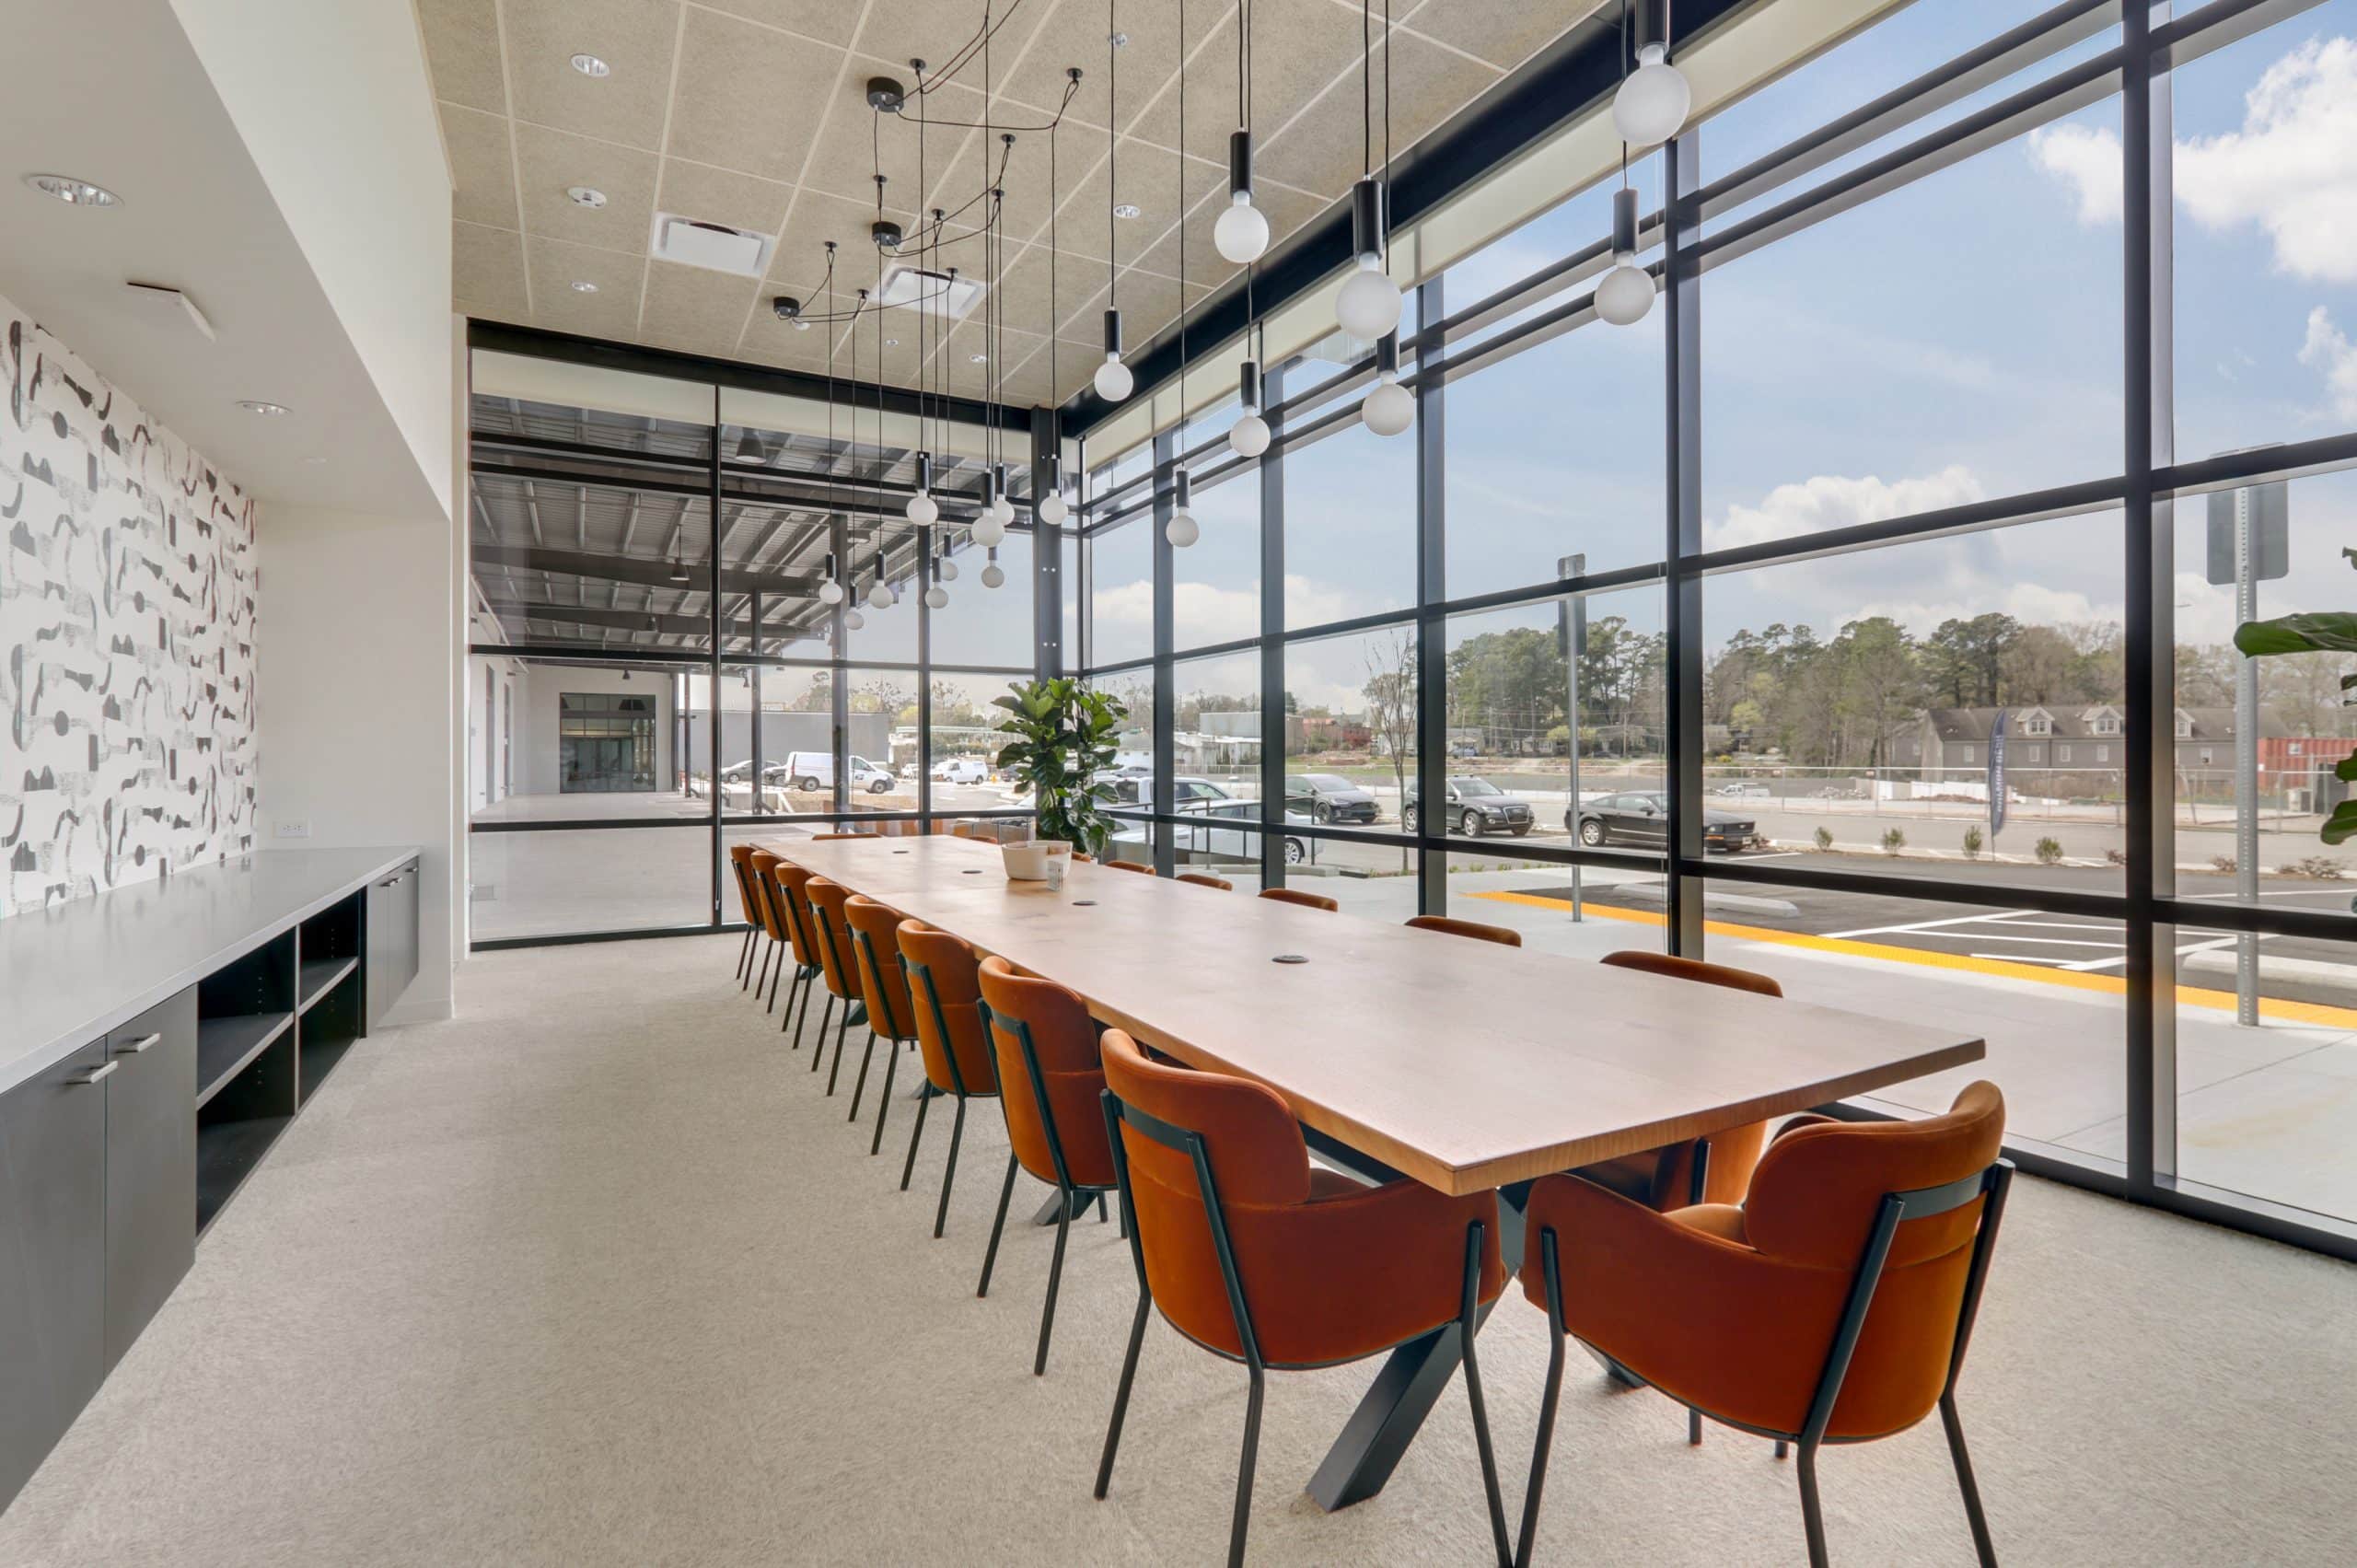 Meeting-ready conference rooms